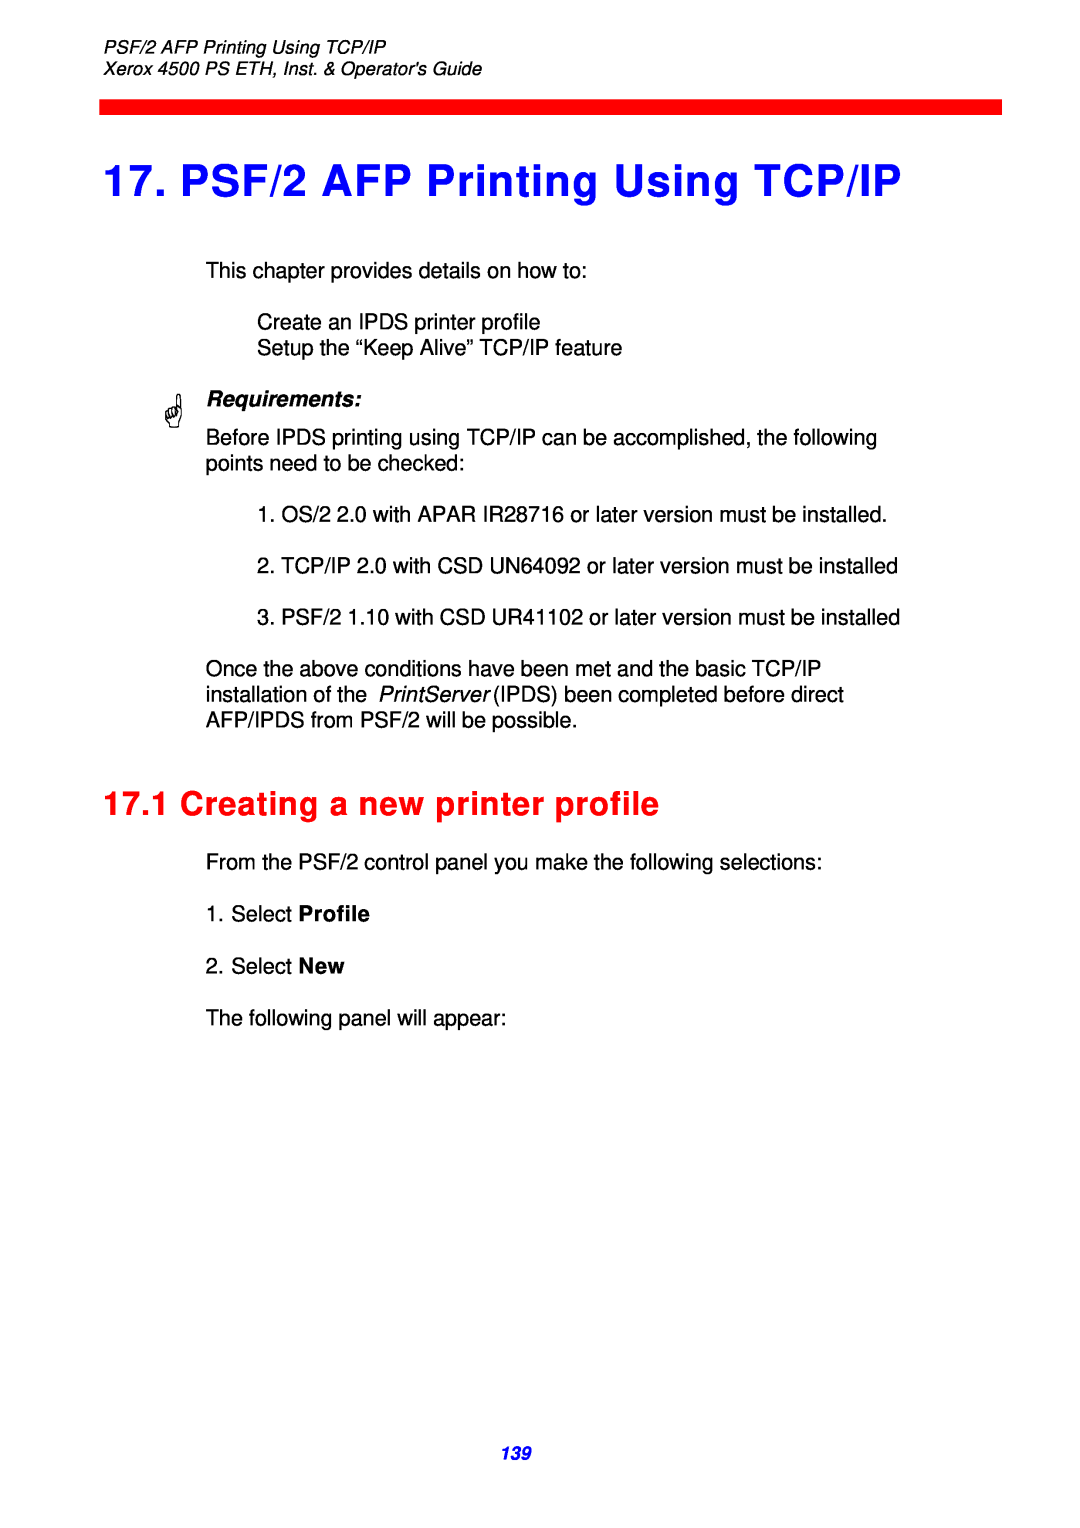 Xerox 4500 ps eth instruction manual PSF/2 AFP Printing Using TCP/IP, Creating a new printer profile, Requirements 